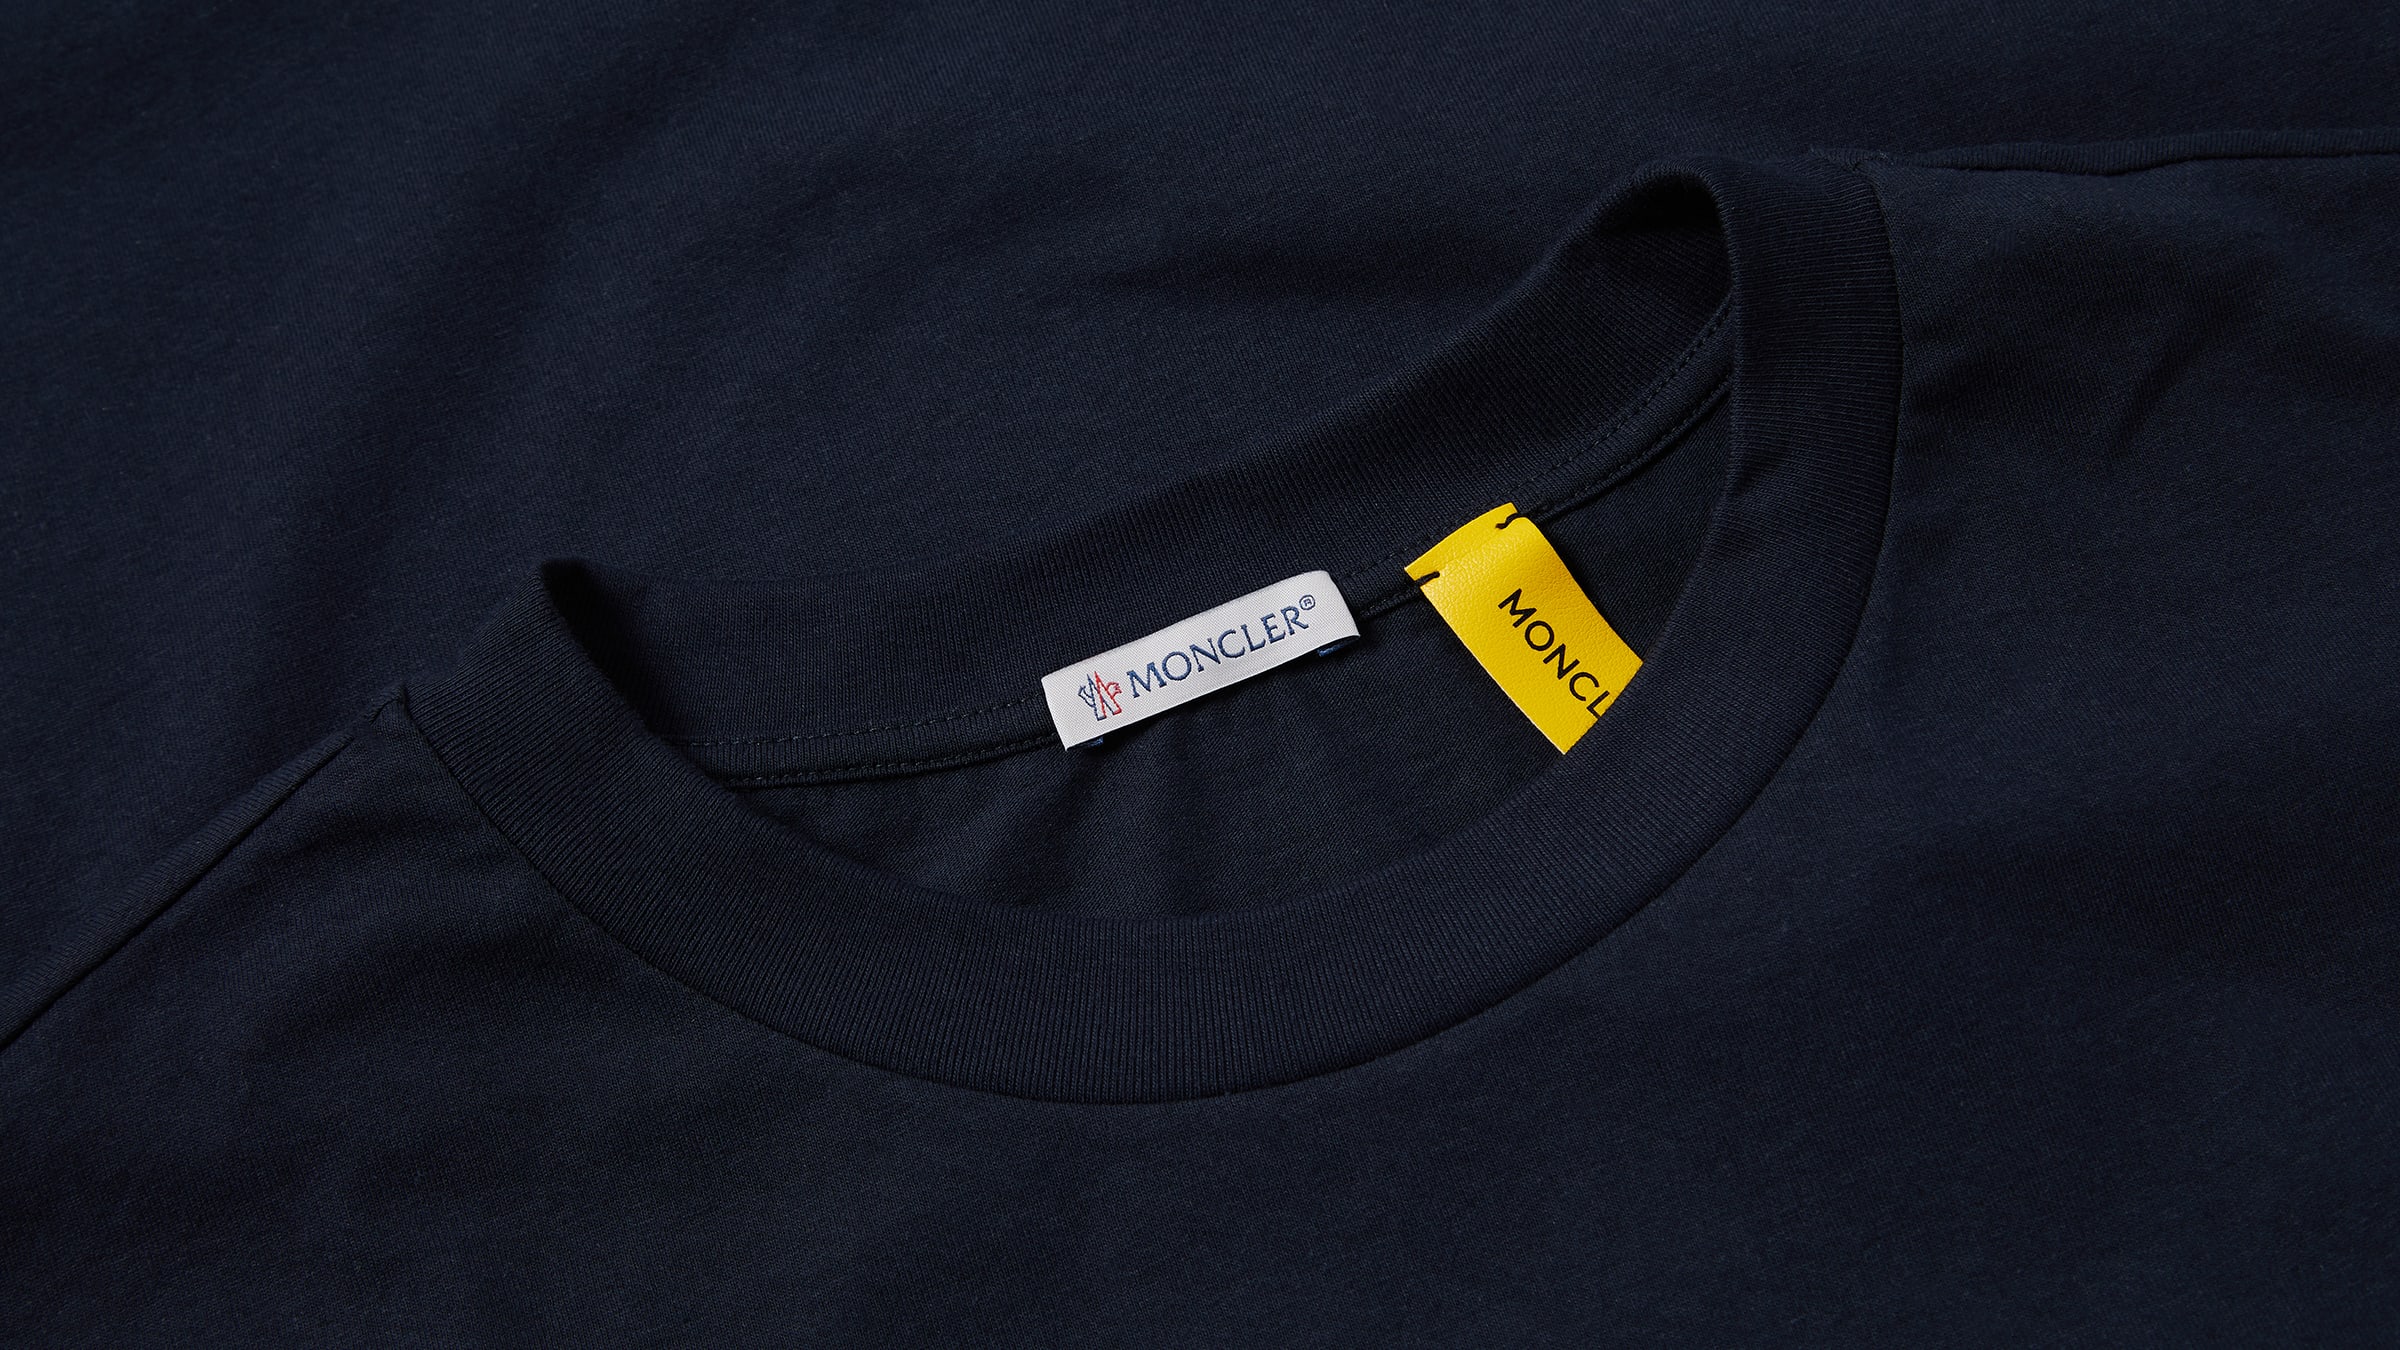 Moncler Genius - 1 JW Anderson Sylvester Print Tee (Navy) | END. Launches